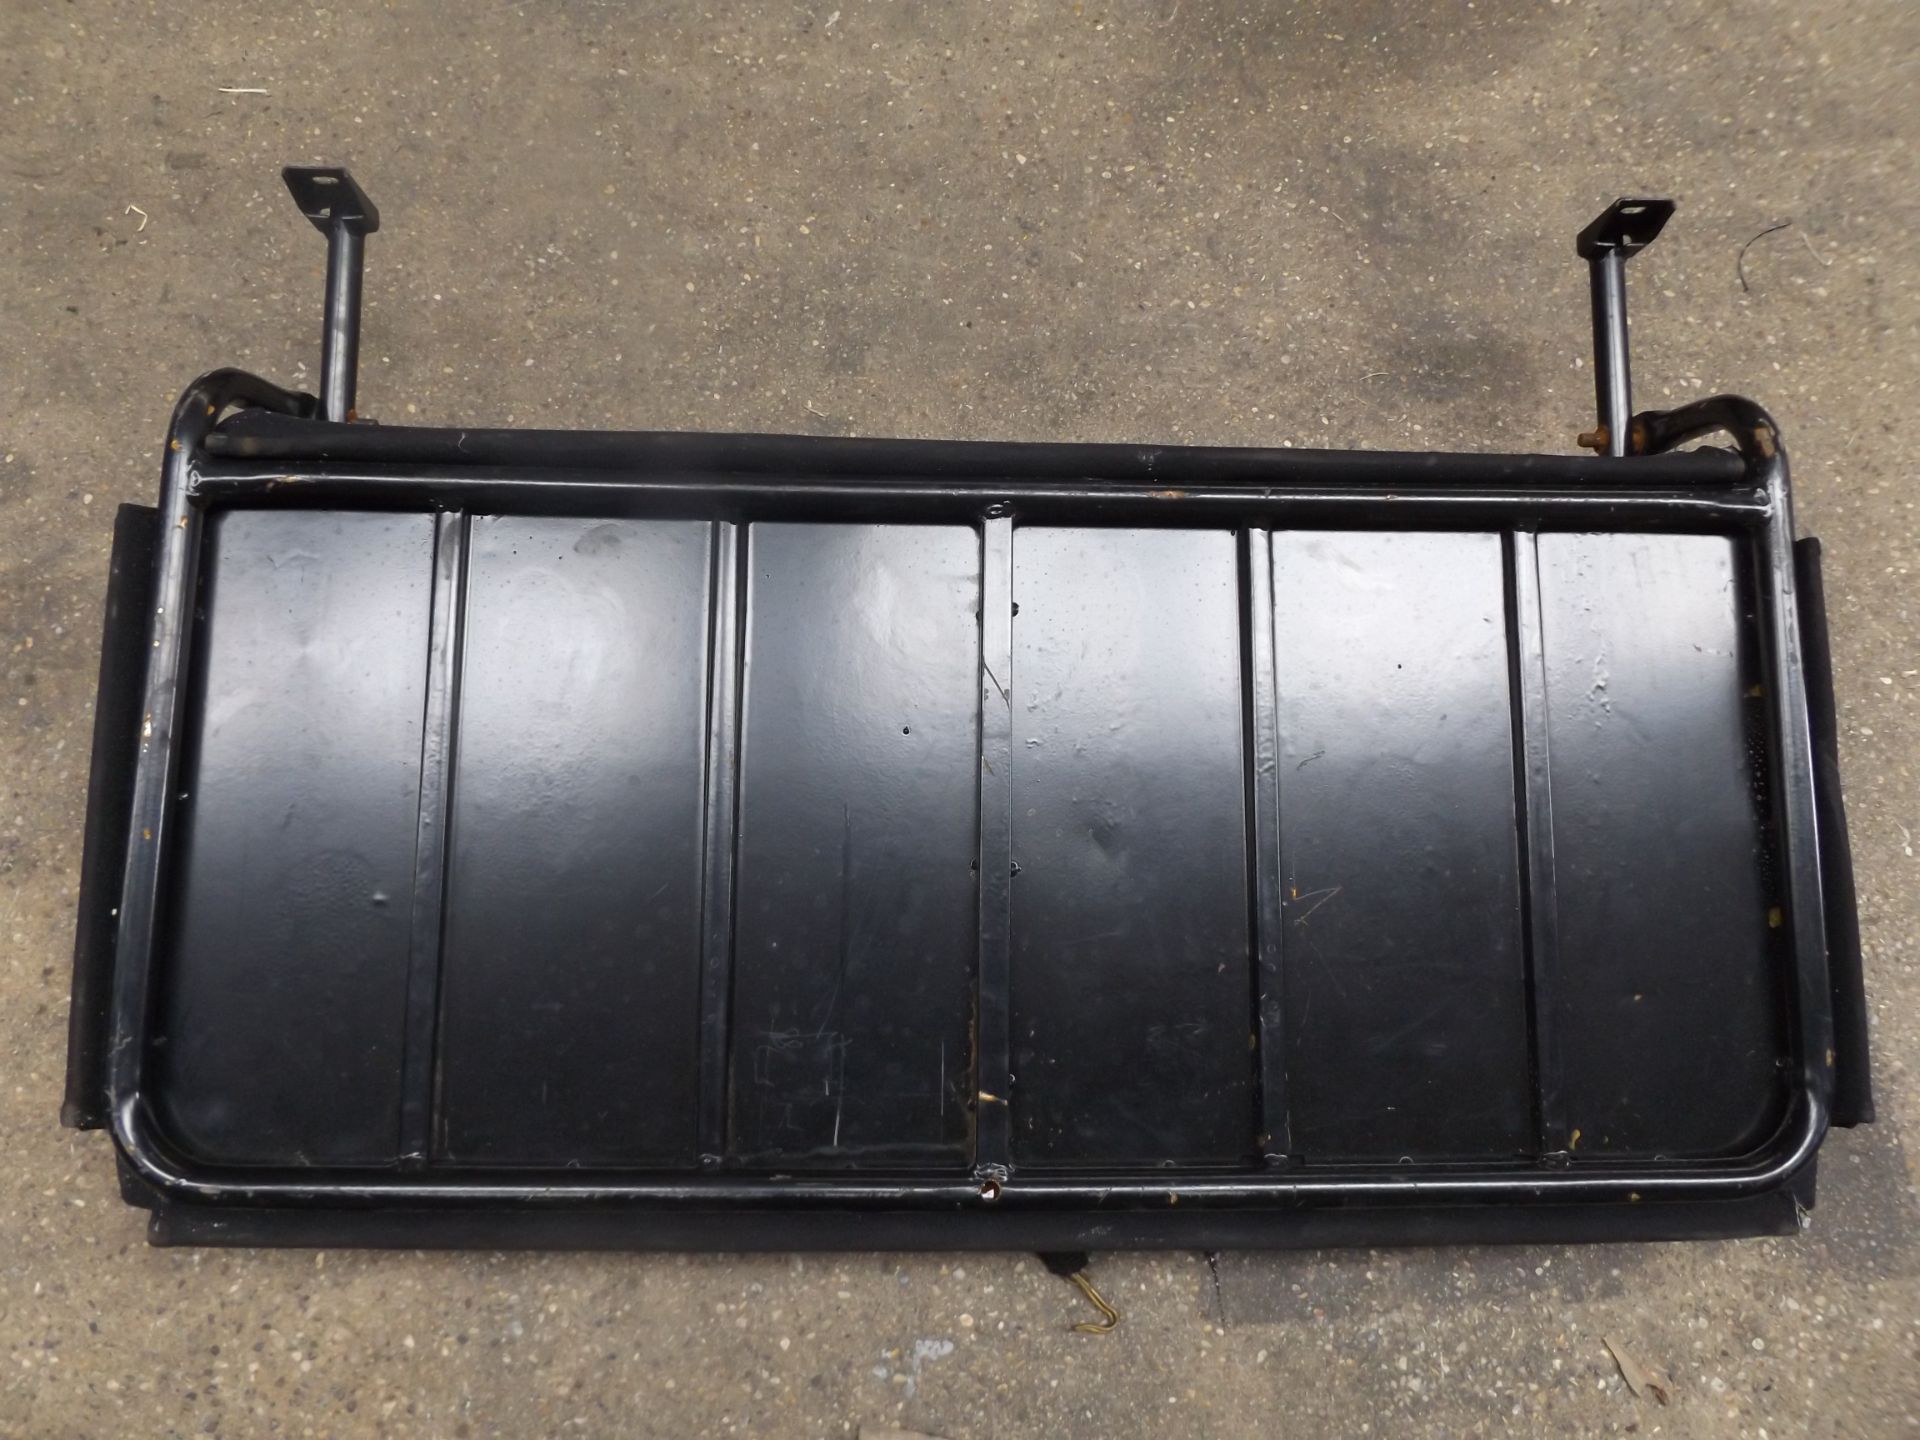 2 x Land Rover Wolf Bench Seats - Image 9 of 9